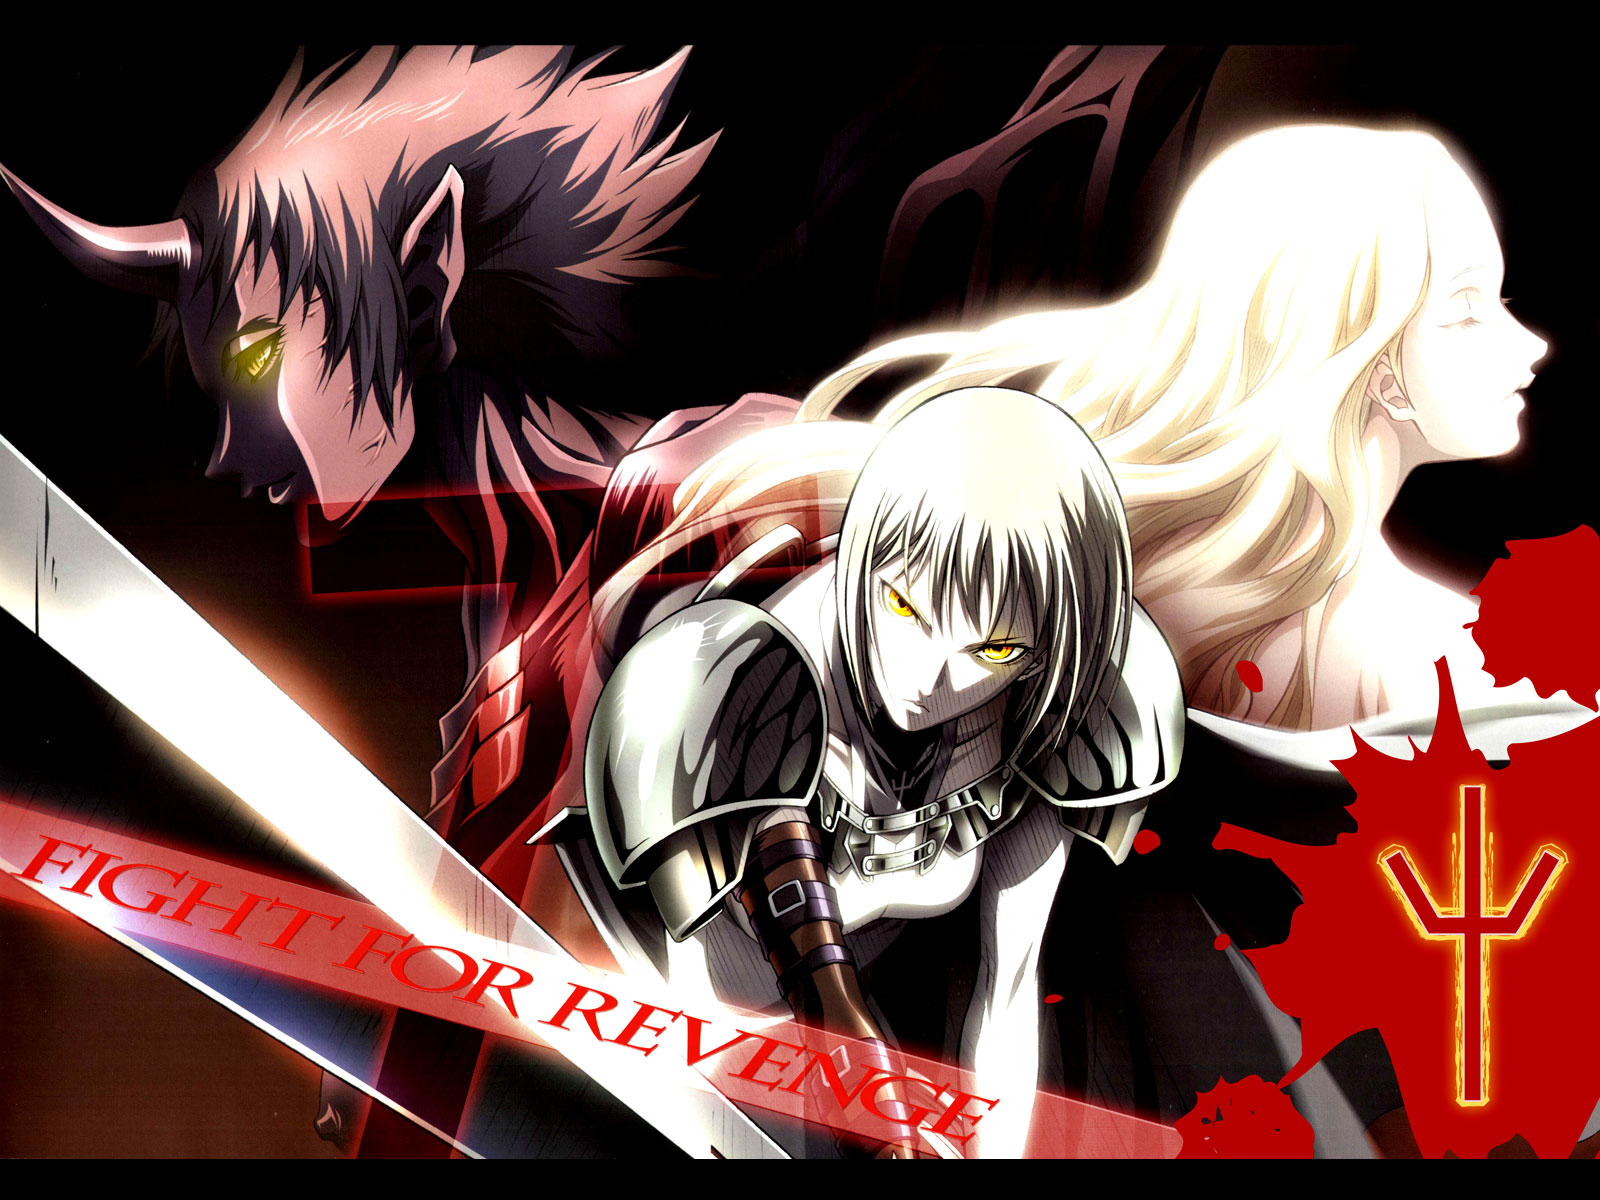  anime claymore wallpaper